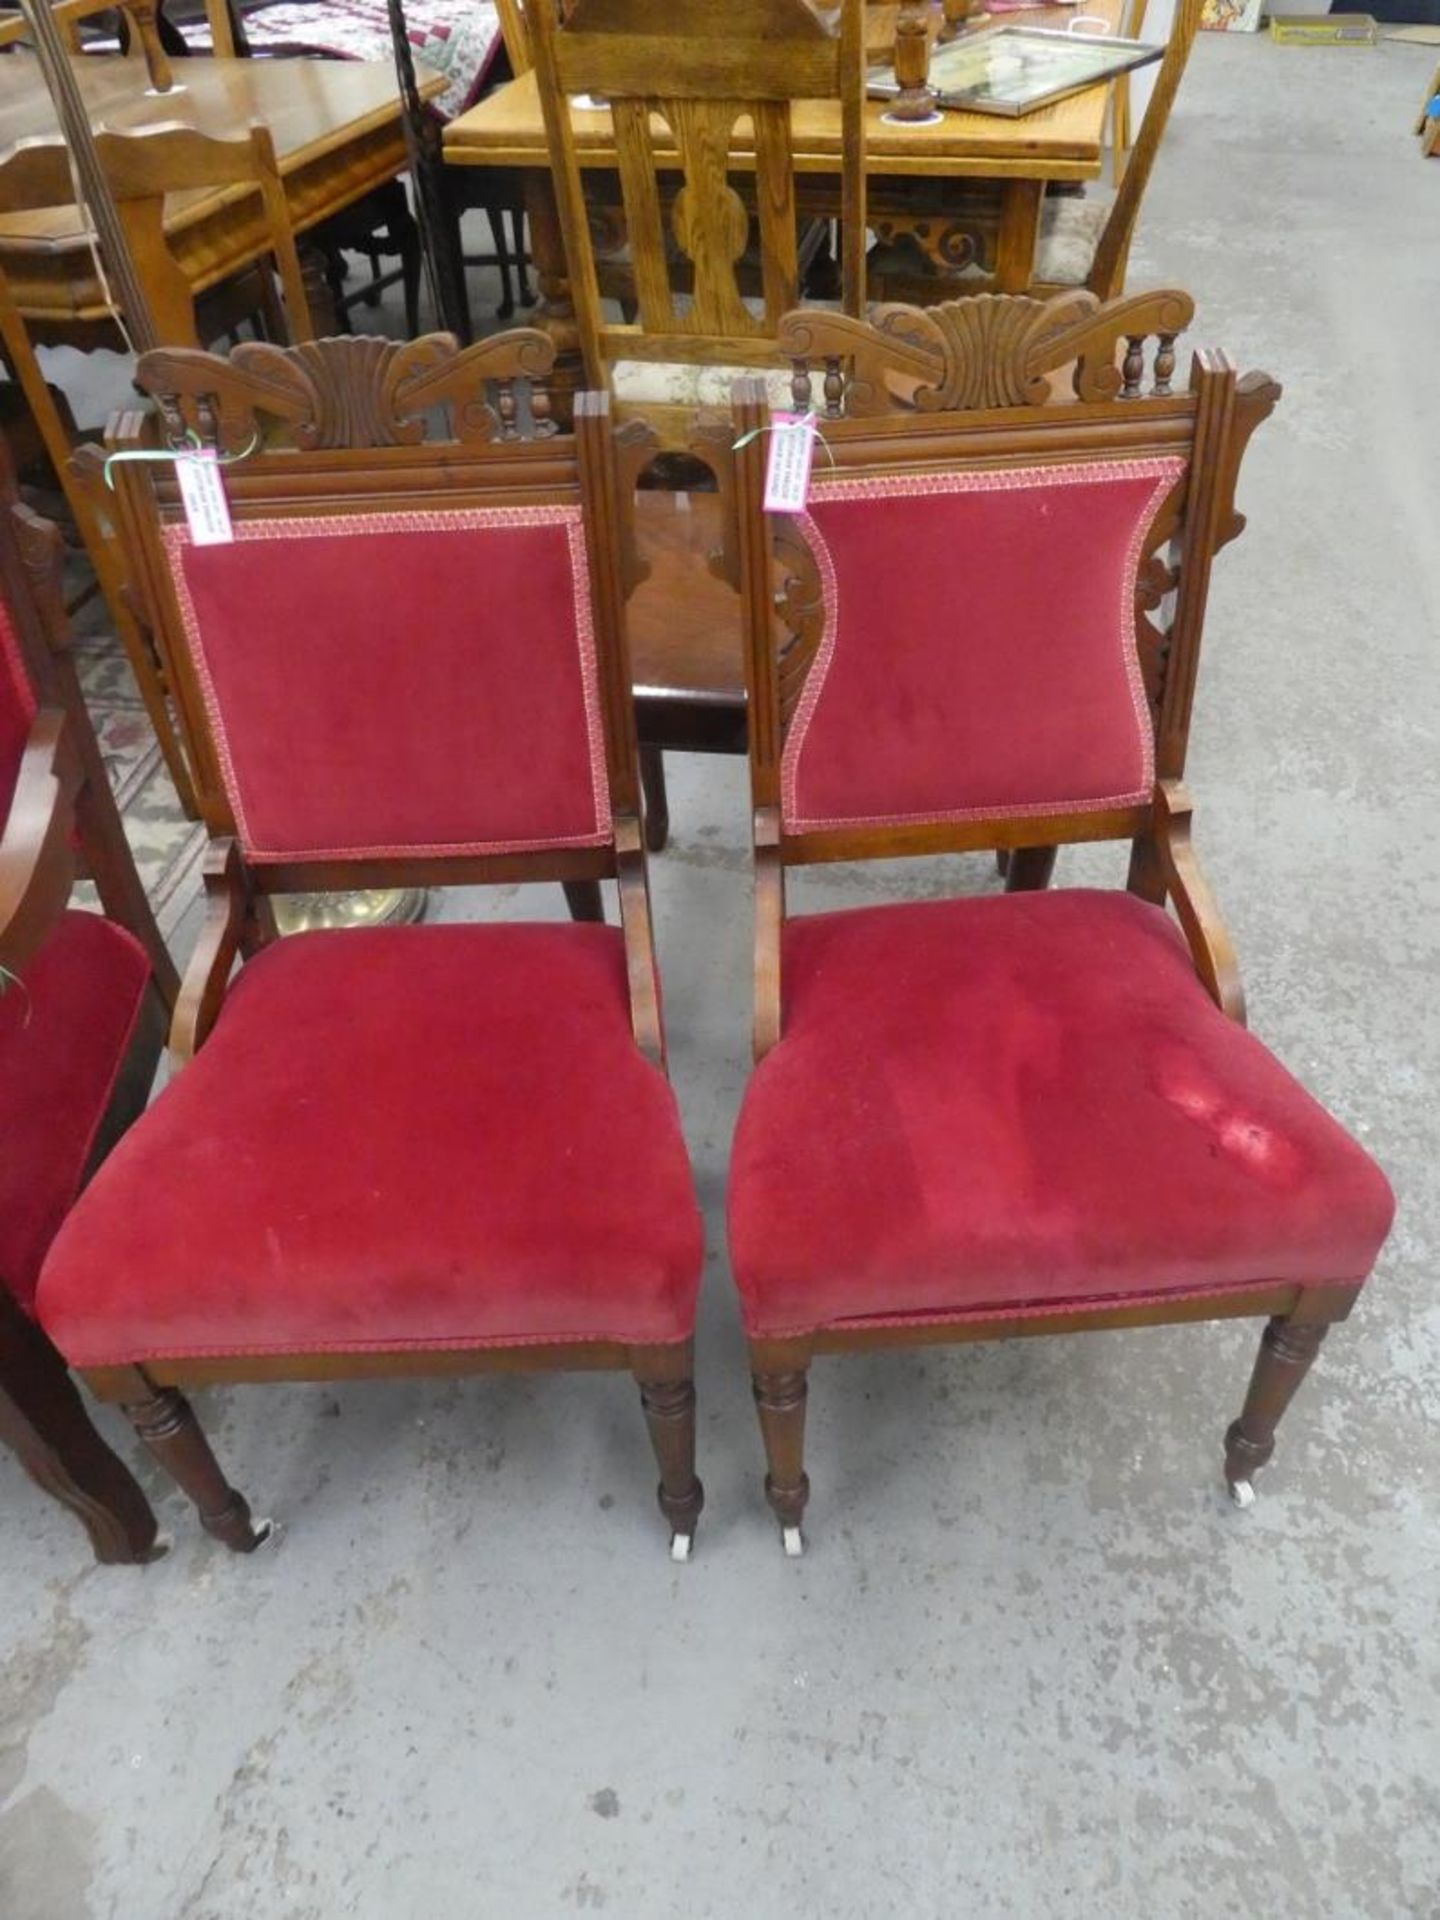 2 VICTORIAN PARLOUR CHAIRS - Image 2 of 7